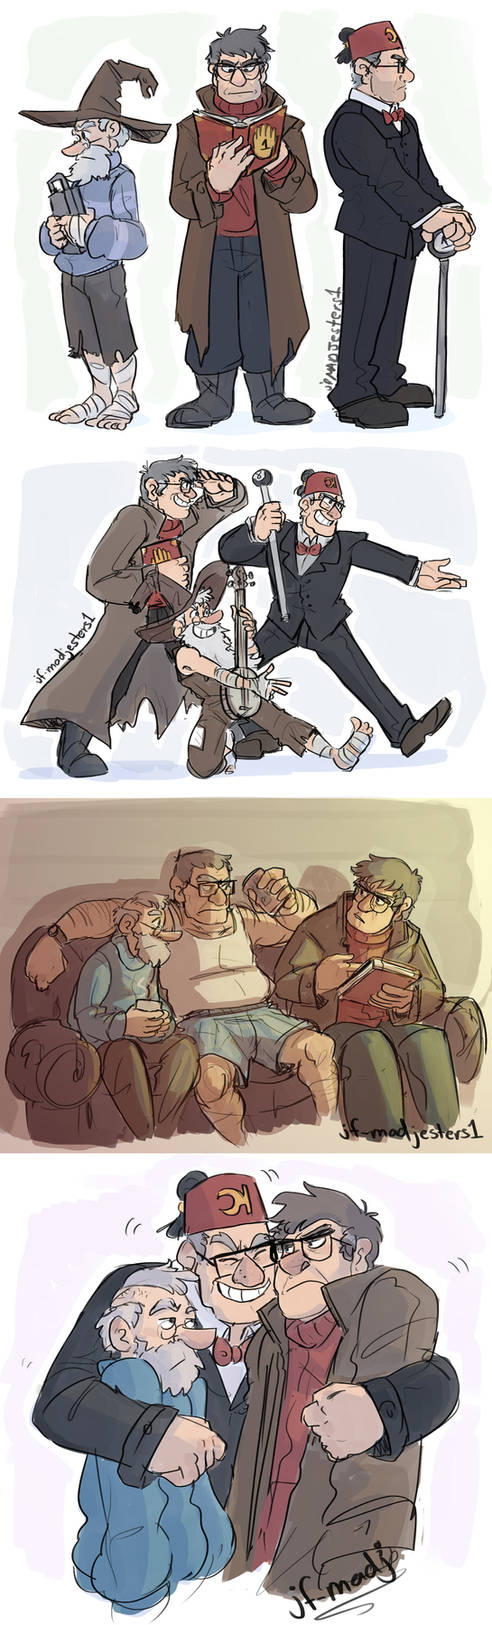 Gravity Falls Mystery Trio by MadJesters1 on DeviantArt